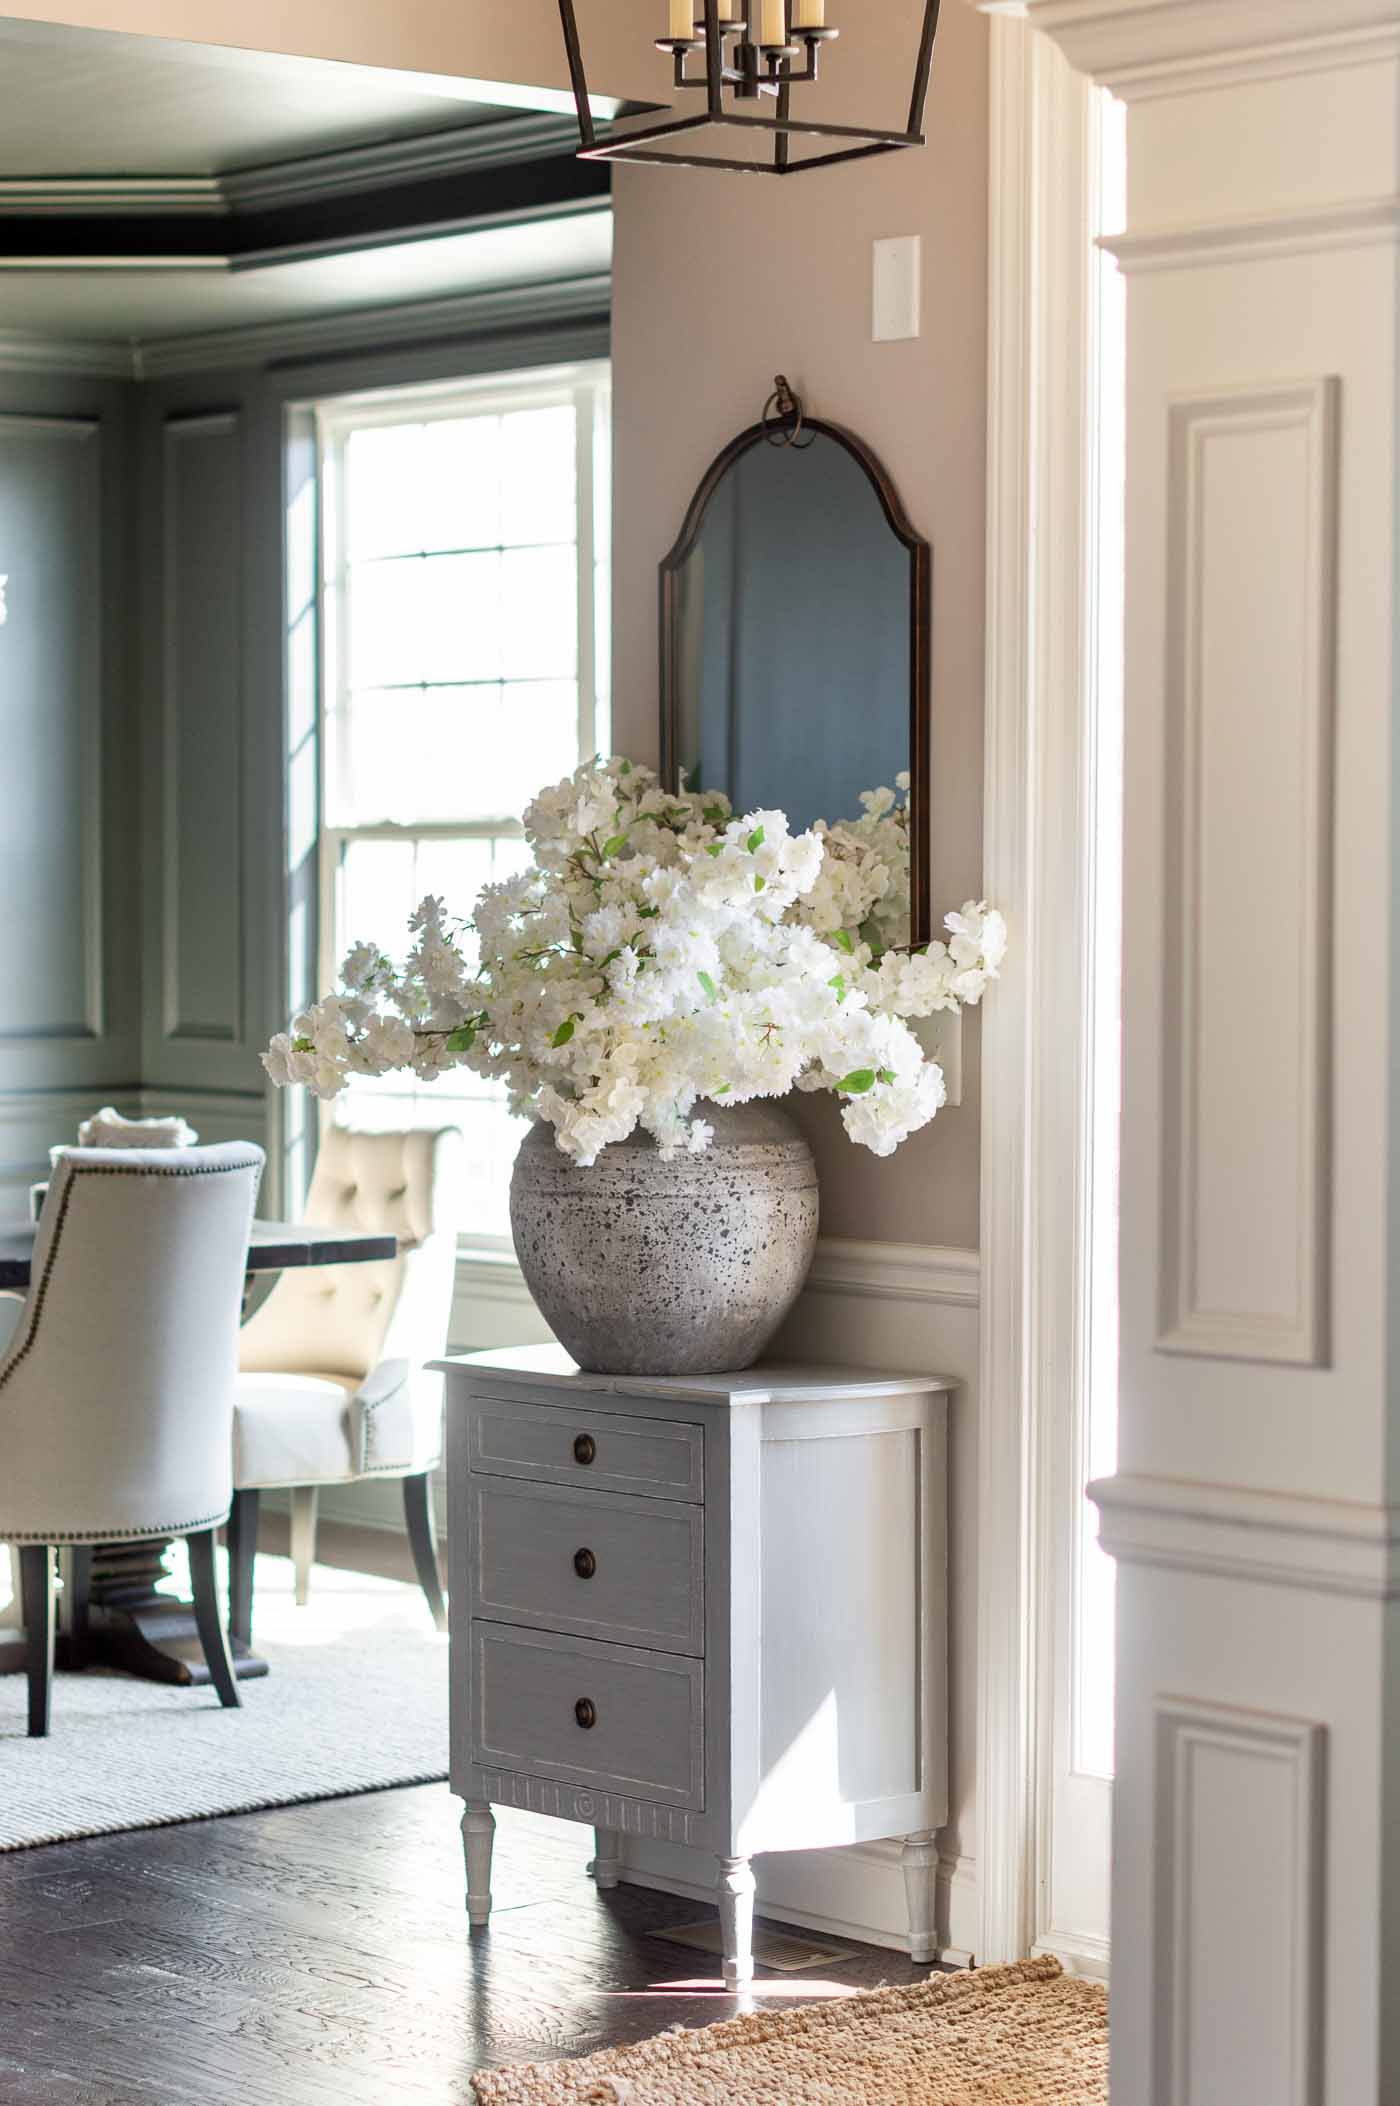 Entryway in Versatile Gray Paint by Sherwin Williams -- a Warm Greige Interior Paint Color